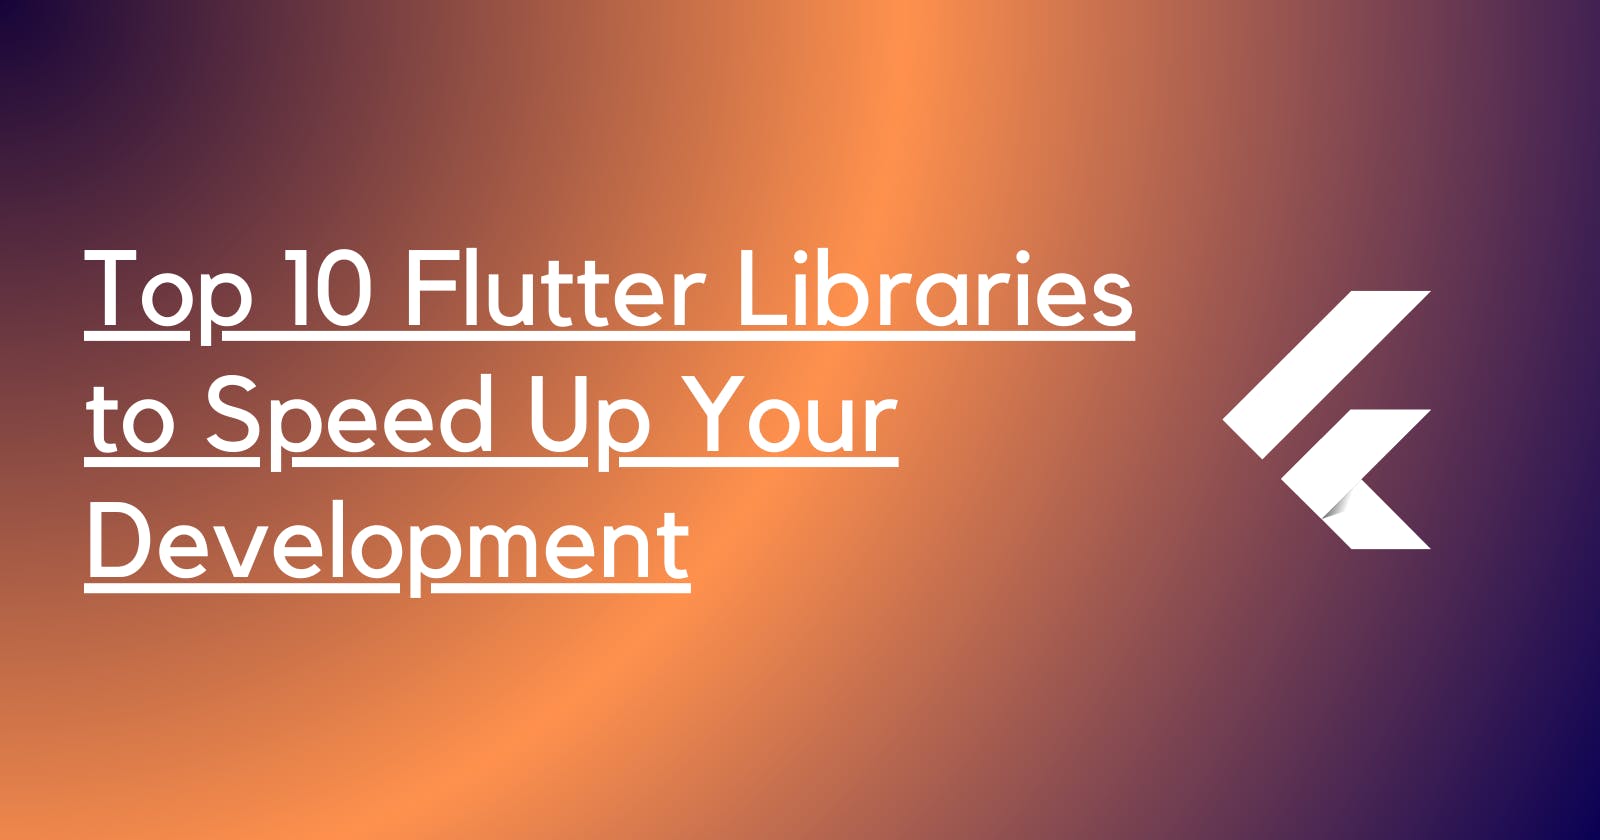 Top 10 Flutter Libraries and Frameworks to Speed Up Your Development